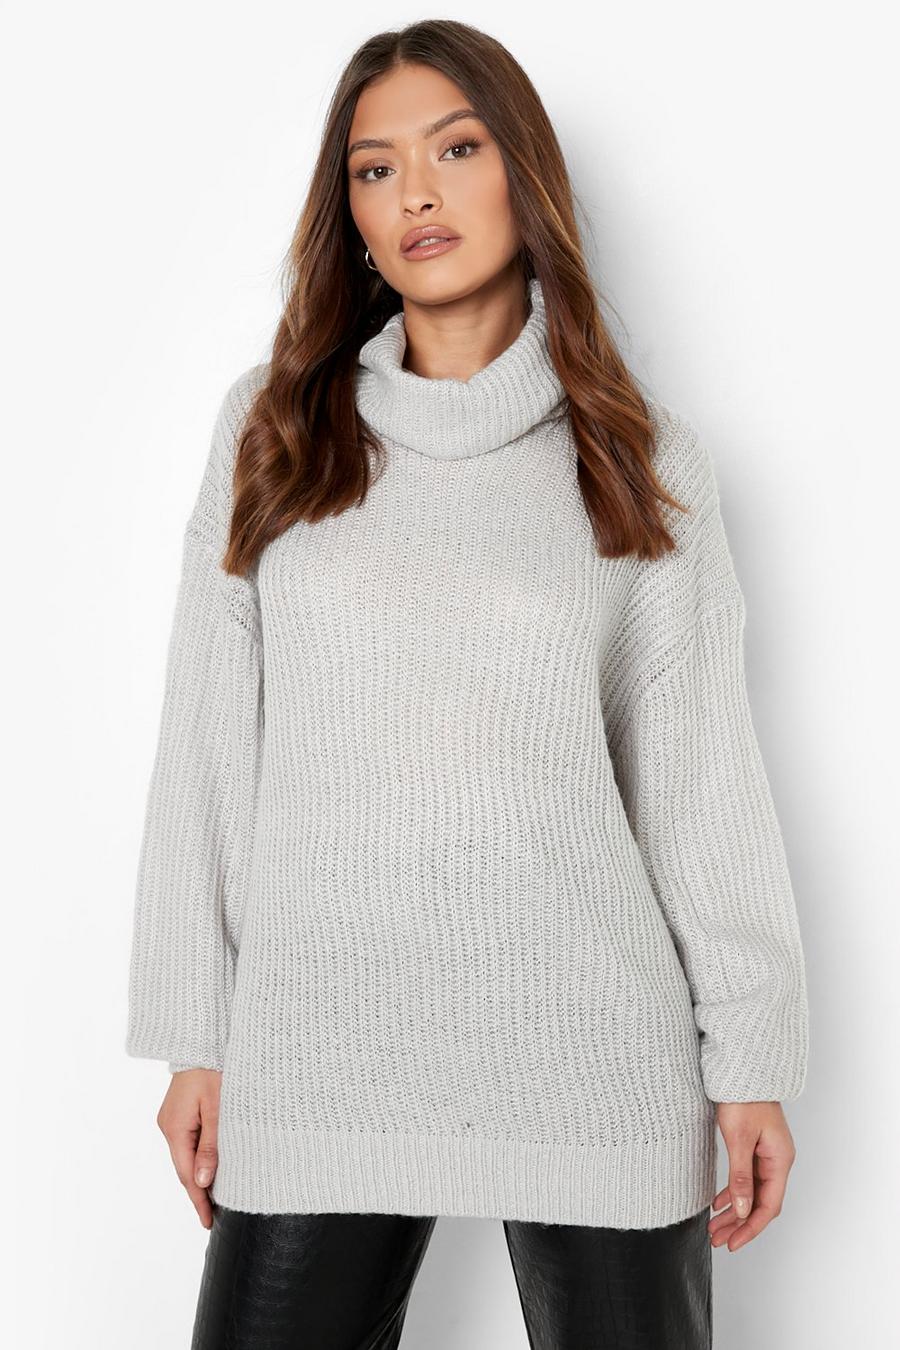 Silver grey Oversized Roll Neck Rib Knitted Jumper